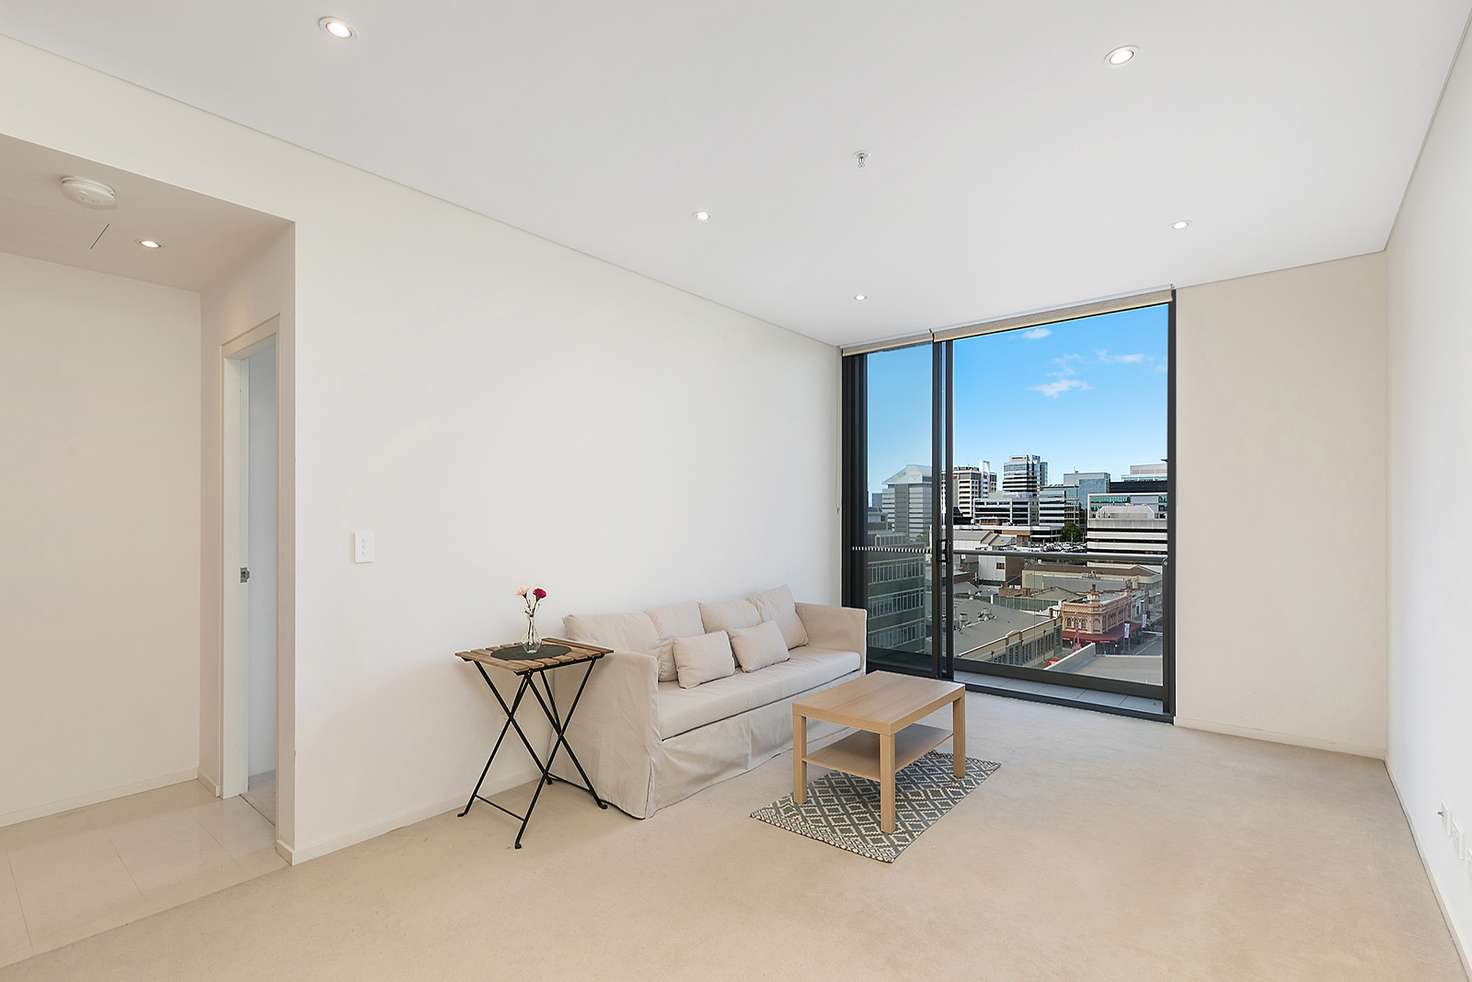 Main view of Homely apartment listing, 708/45 Macquarie Street, Parramatta NSW 2150